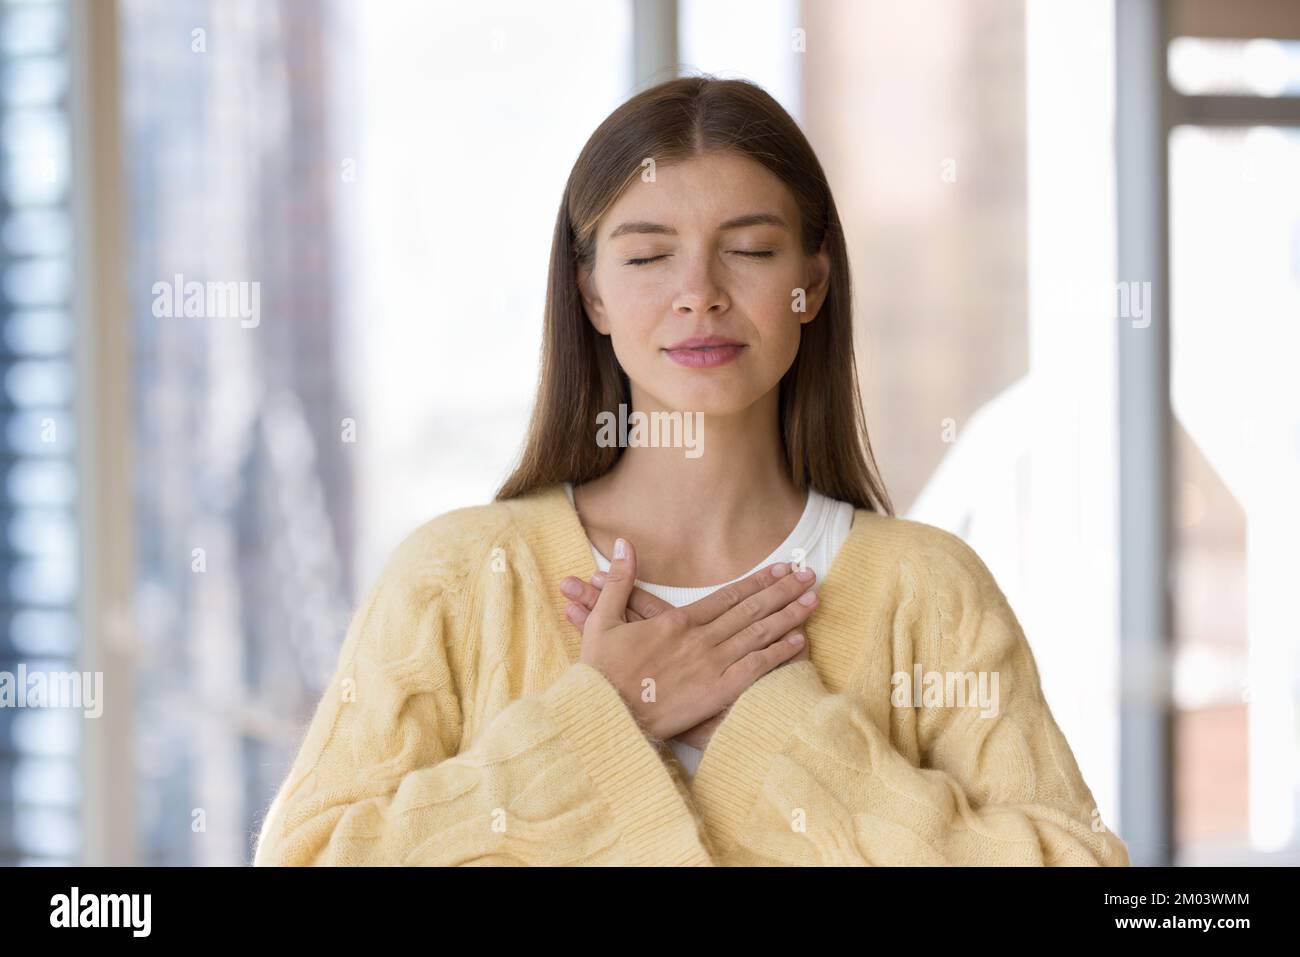 Peaceful beautiful young adult girl stacking hands on chest Stock Photo